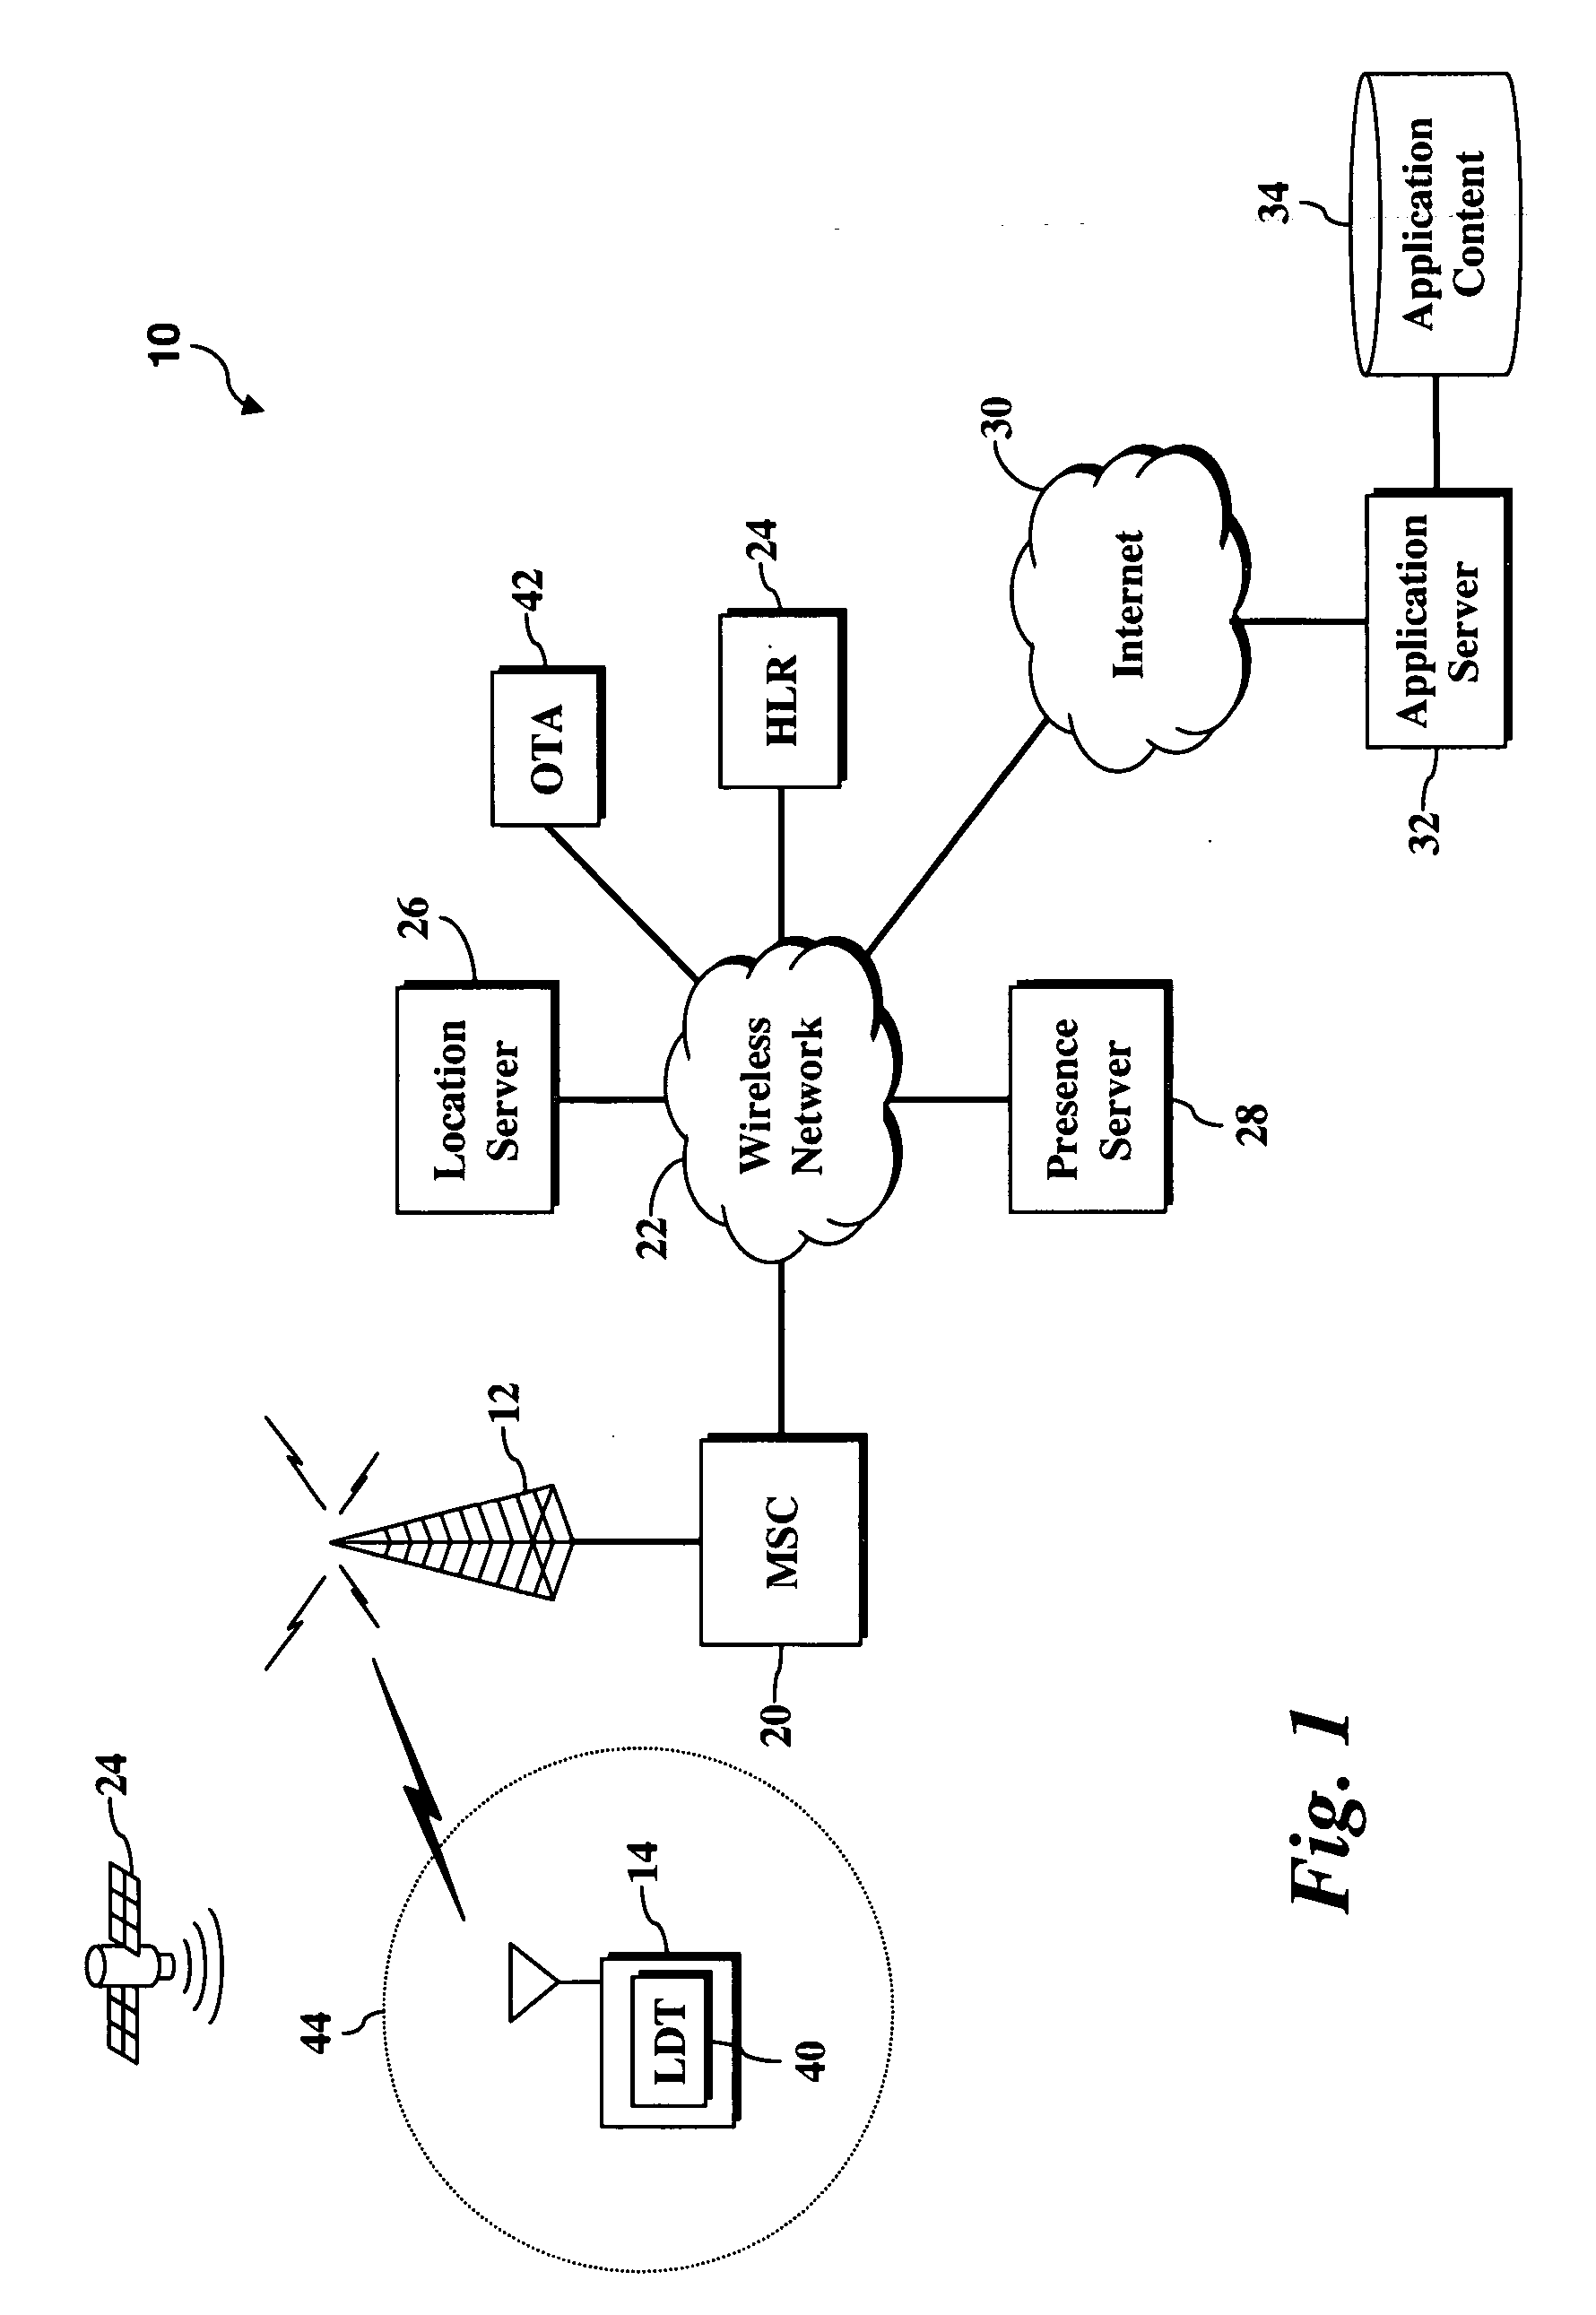 System and method for collecting continuous location updates while minimizing overall network utilization